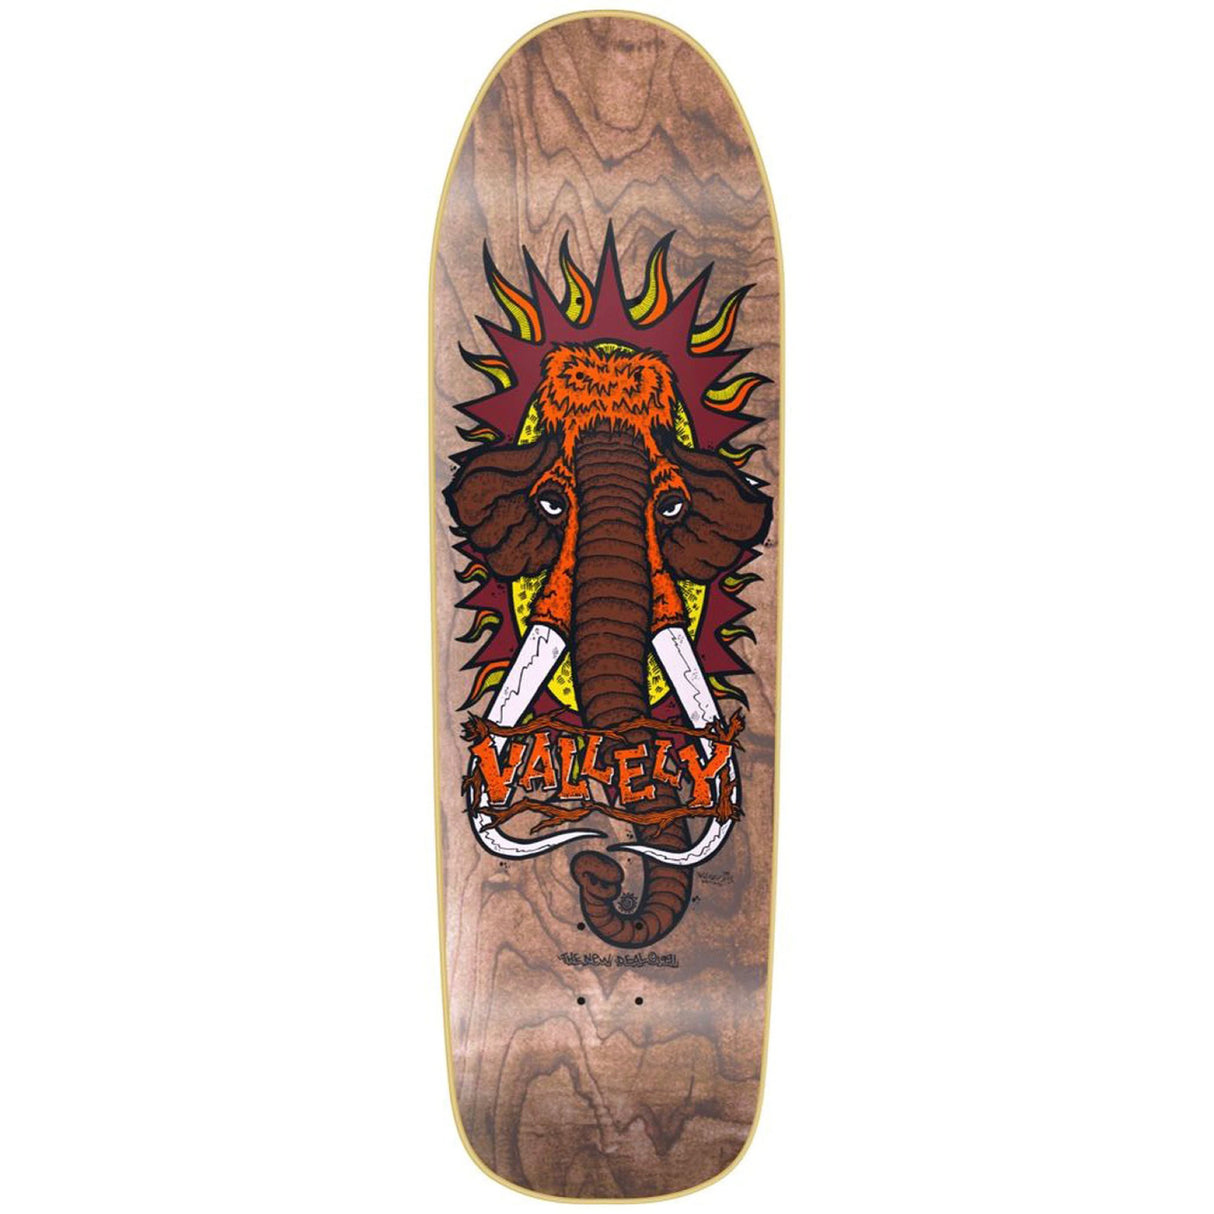 New Deal Vallely Mammoth Sp Brown 9.5" Skateboard Deck